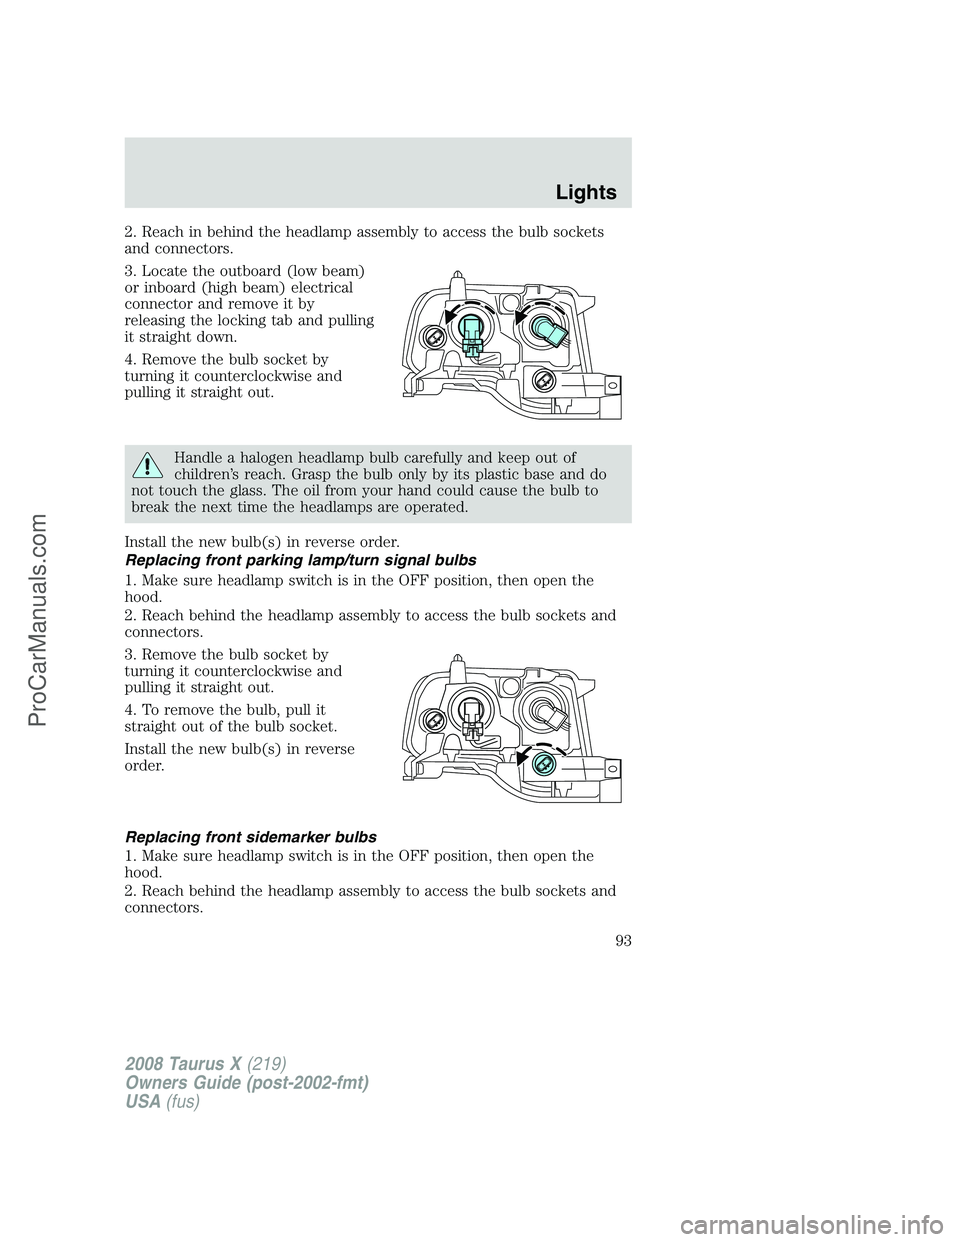 FORD FREESTYLE 2008  Owners Manual 2. Reach in behind the headlamp assembly to access the bulb sockets
and connectors.
3. Locate the outboard (low beam)
or inboard (high beam) electrical
connector and remove it by
releasing the locking